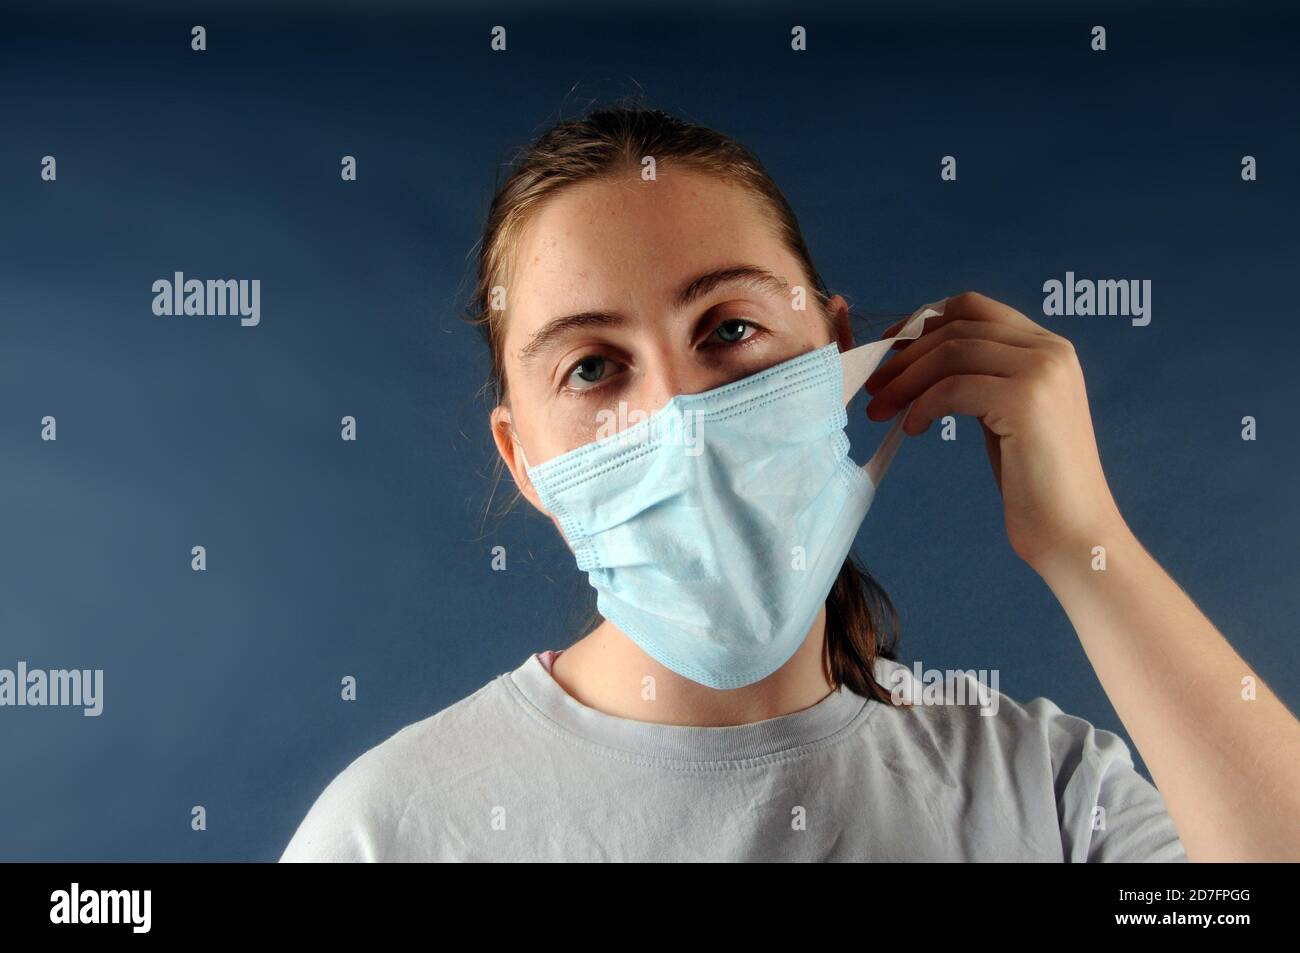 Teenage girl holding a face mask in her hands in front of her face for infection control during the coronavirus or Covid-19 pandemic Stock Photo